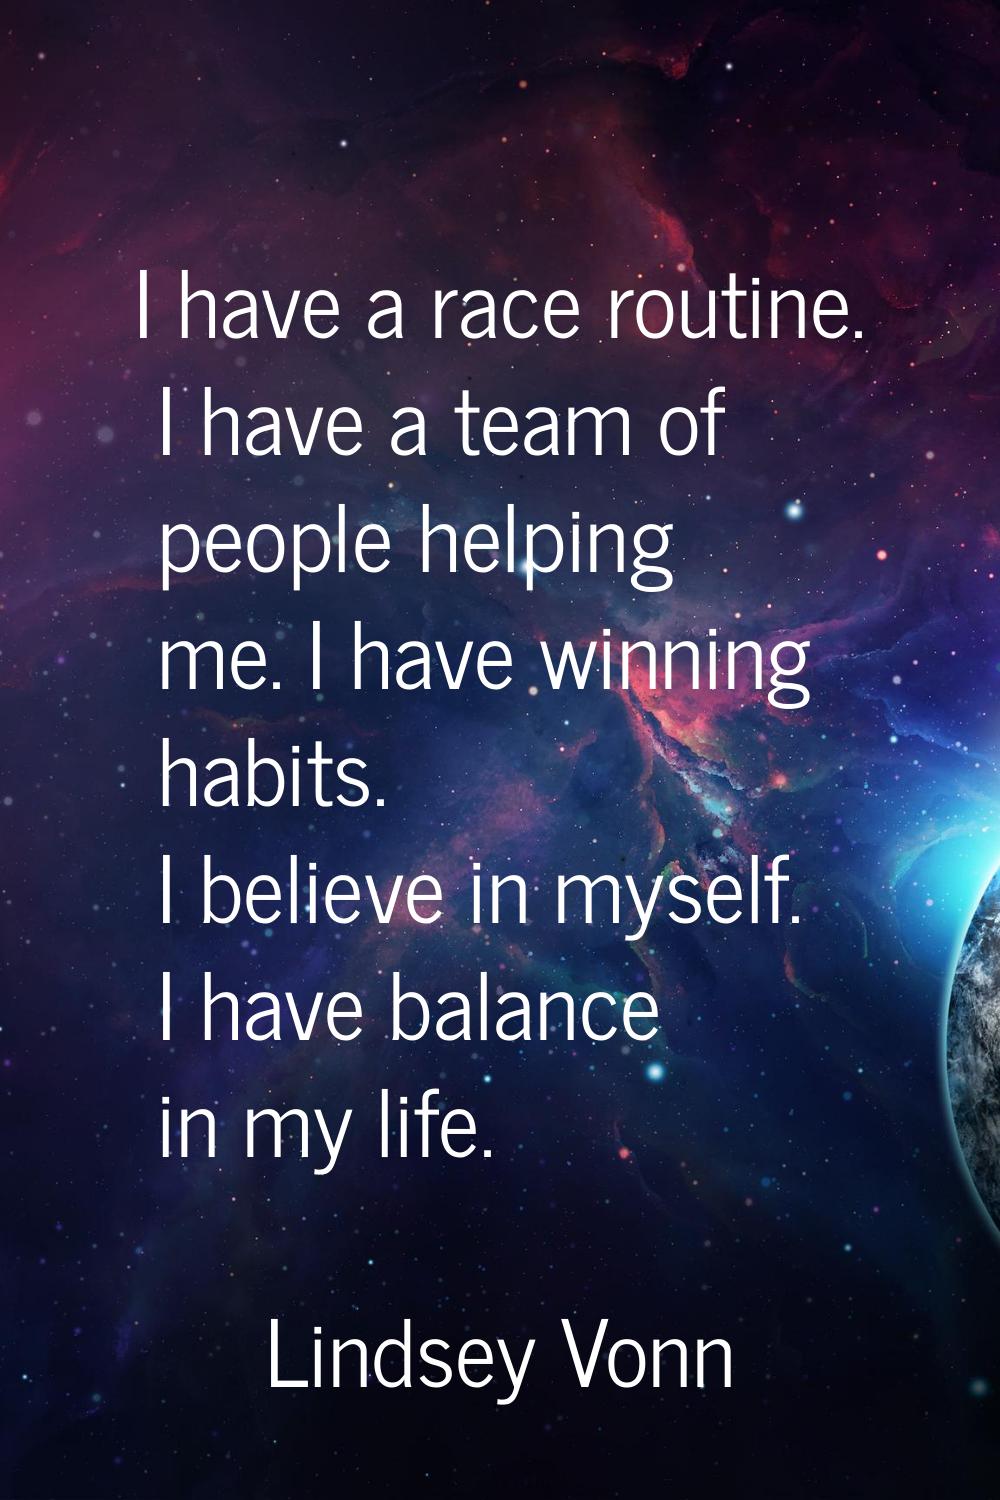 I have a race routine. I have a team of people helping me. I have winning habits. I believe in myse